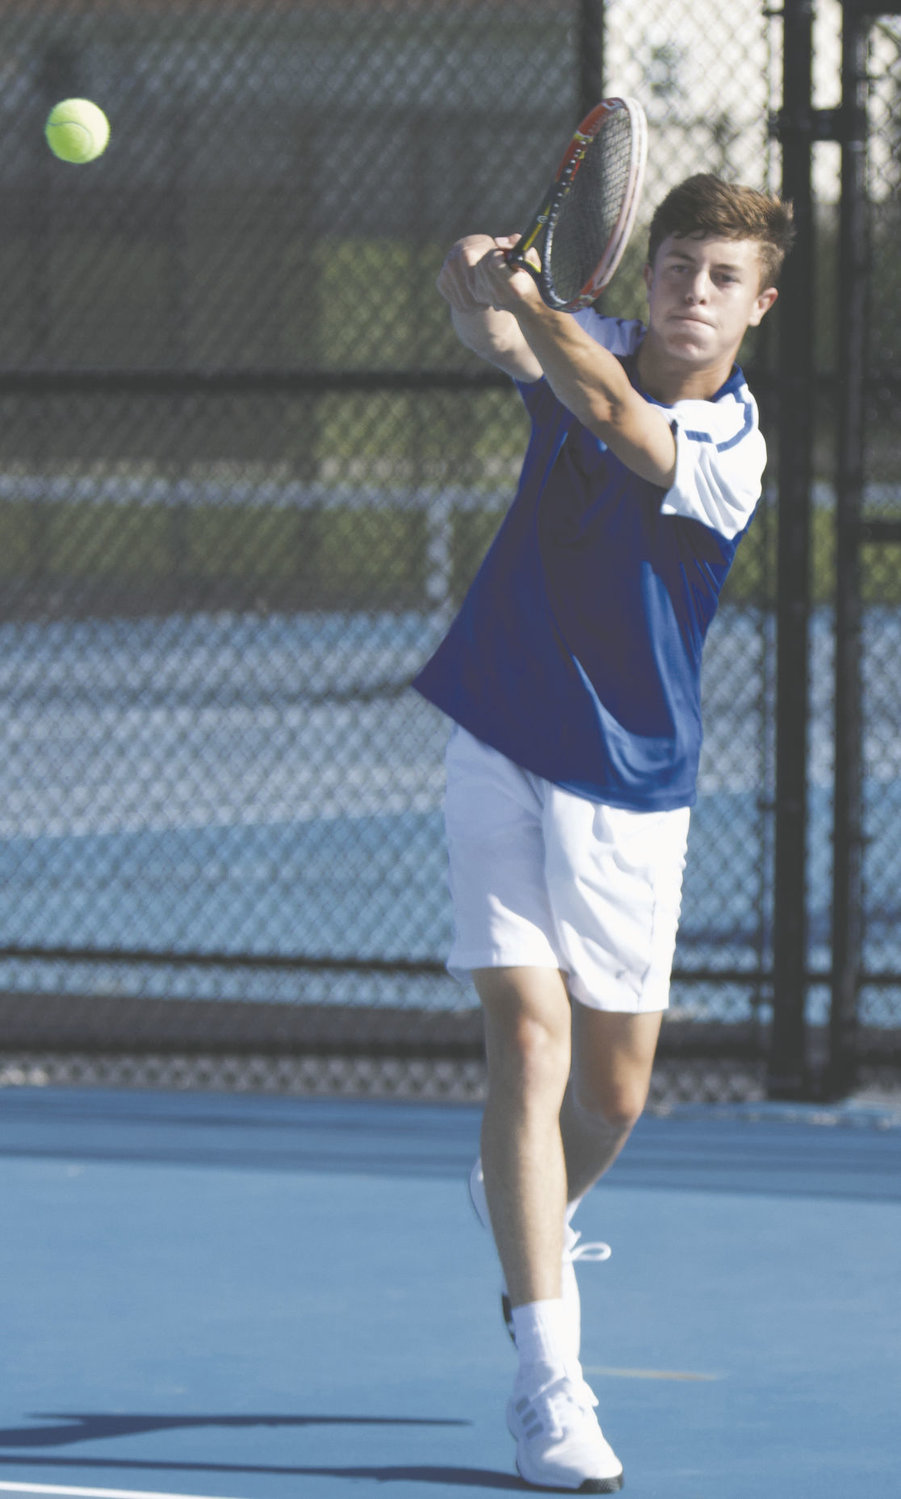 Austin Motz, a Crawfordsville sophomore battled tough in a 6-1, 6-1 loss to Southmont's Adam Cox at No. 1 singles.